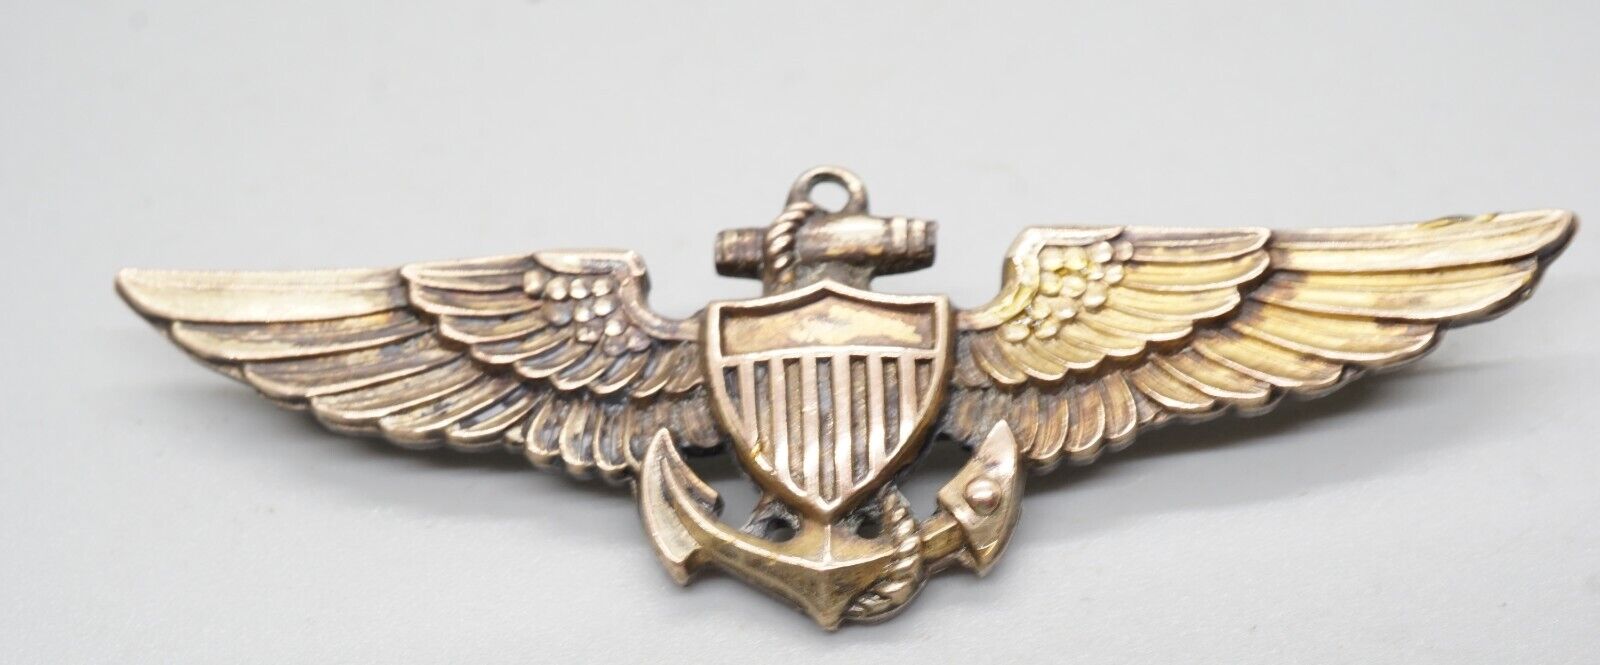 WWII 1/20 10K Gold & Sterling Navy Aviator Pilot 2 3/4 Inch Wings Badge by Amico